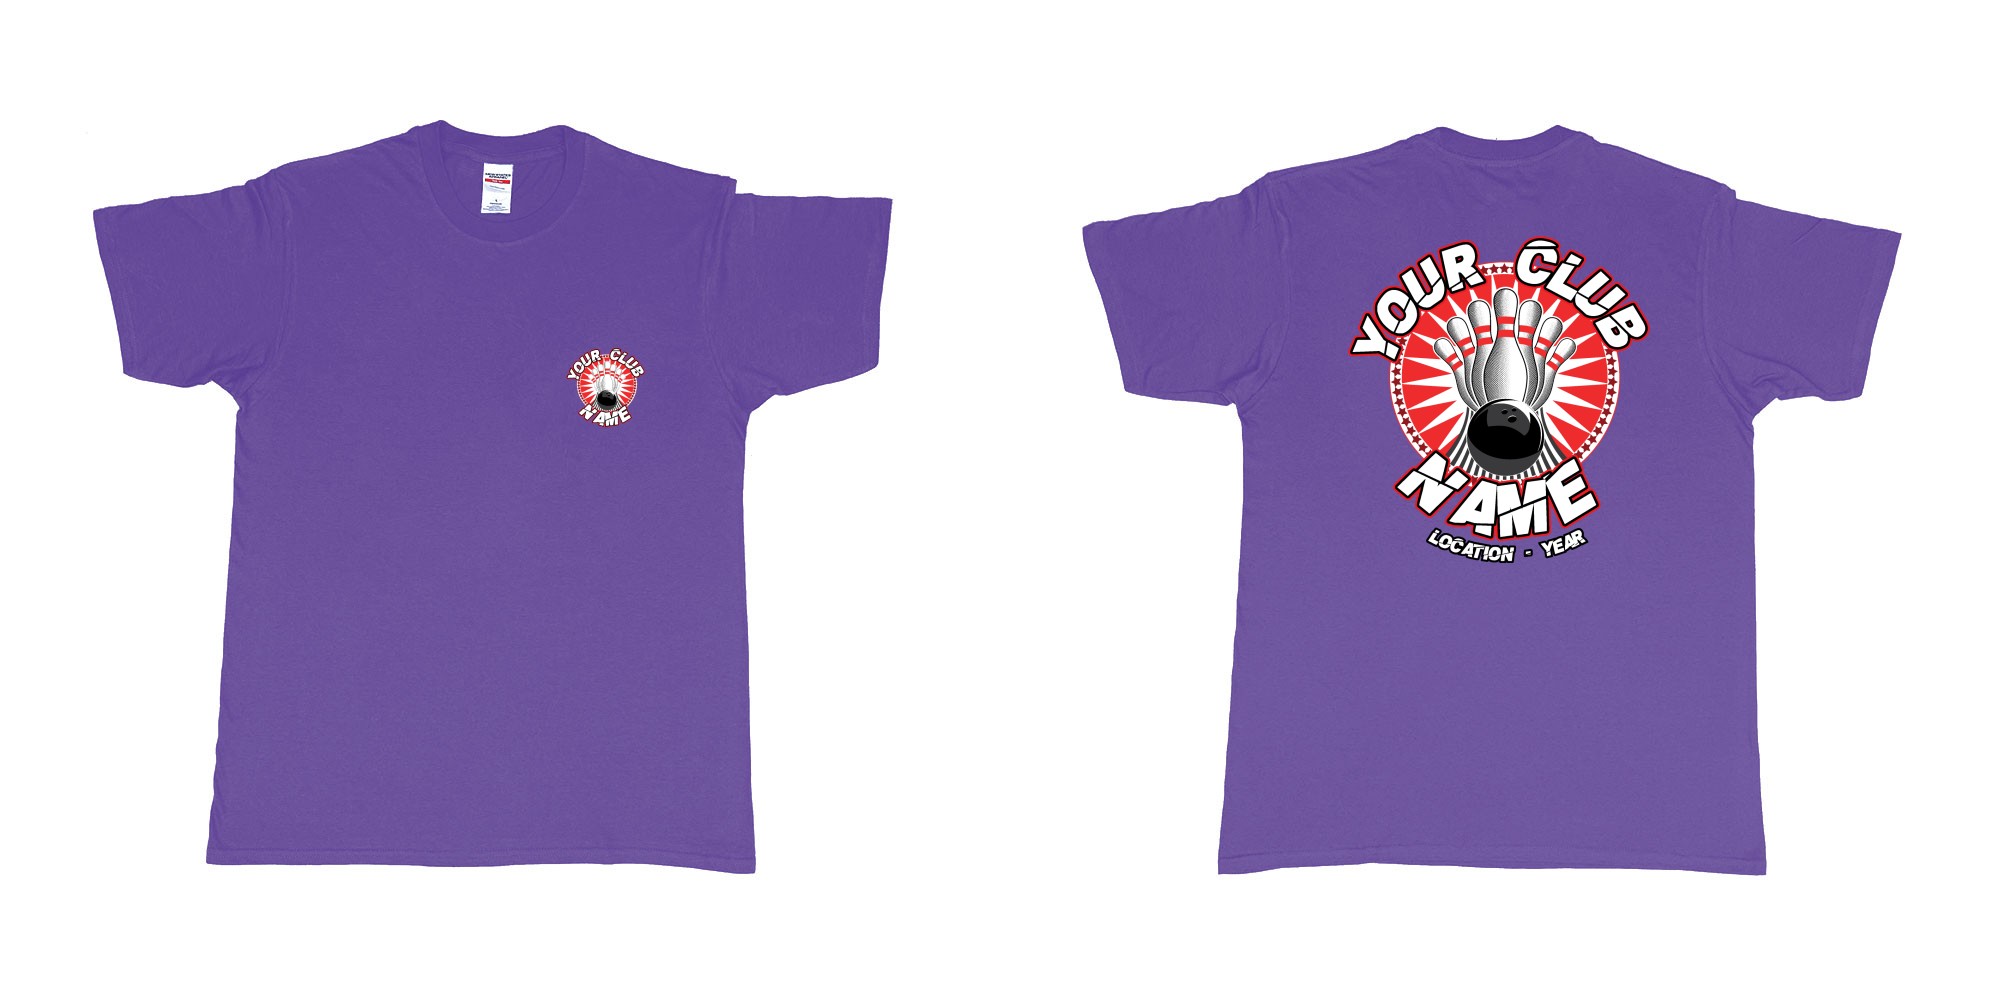 Custom tshirt design TPW strike bowling in fabric color purple choice your own text made in Bali by The Pirate Way